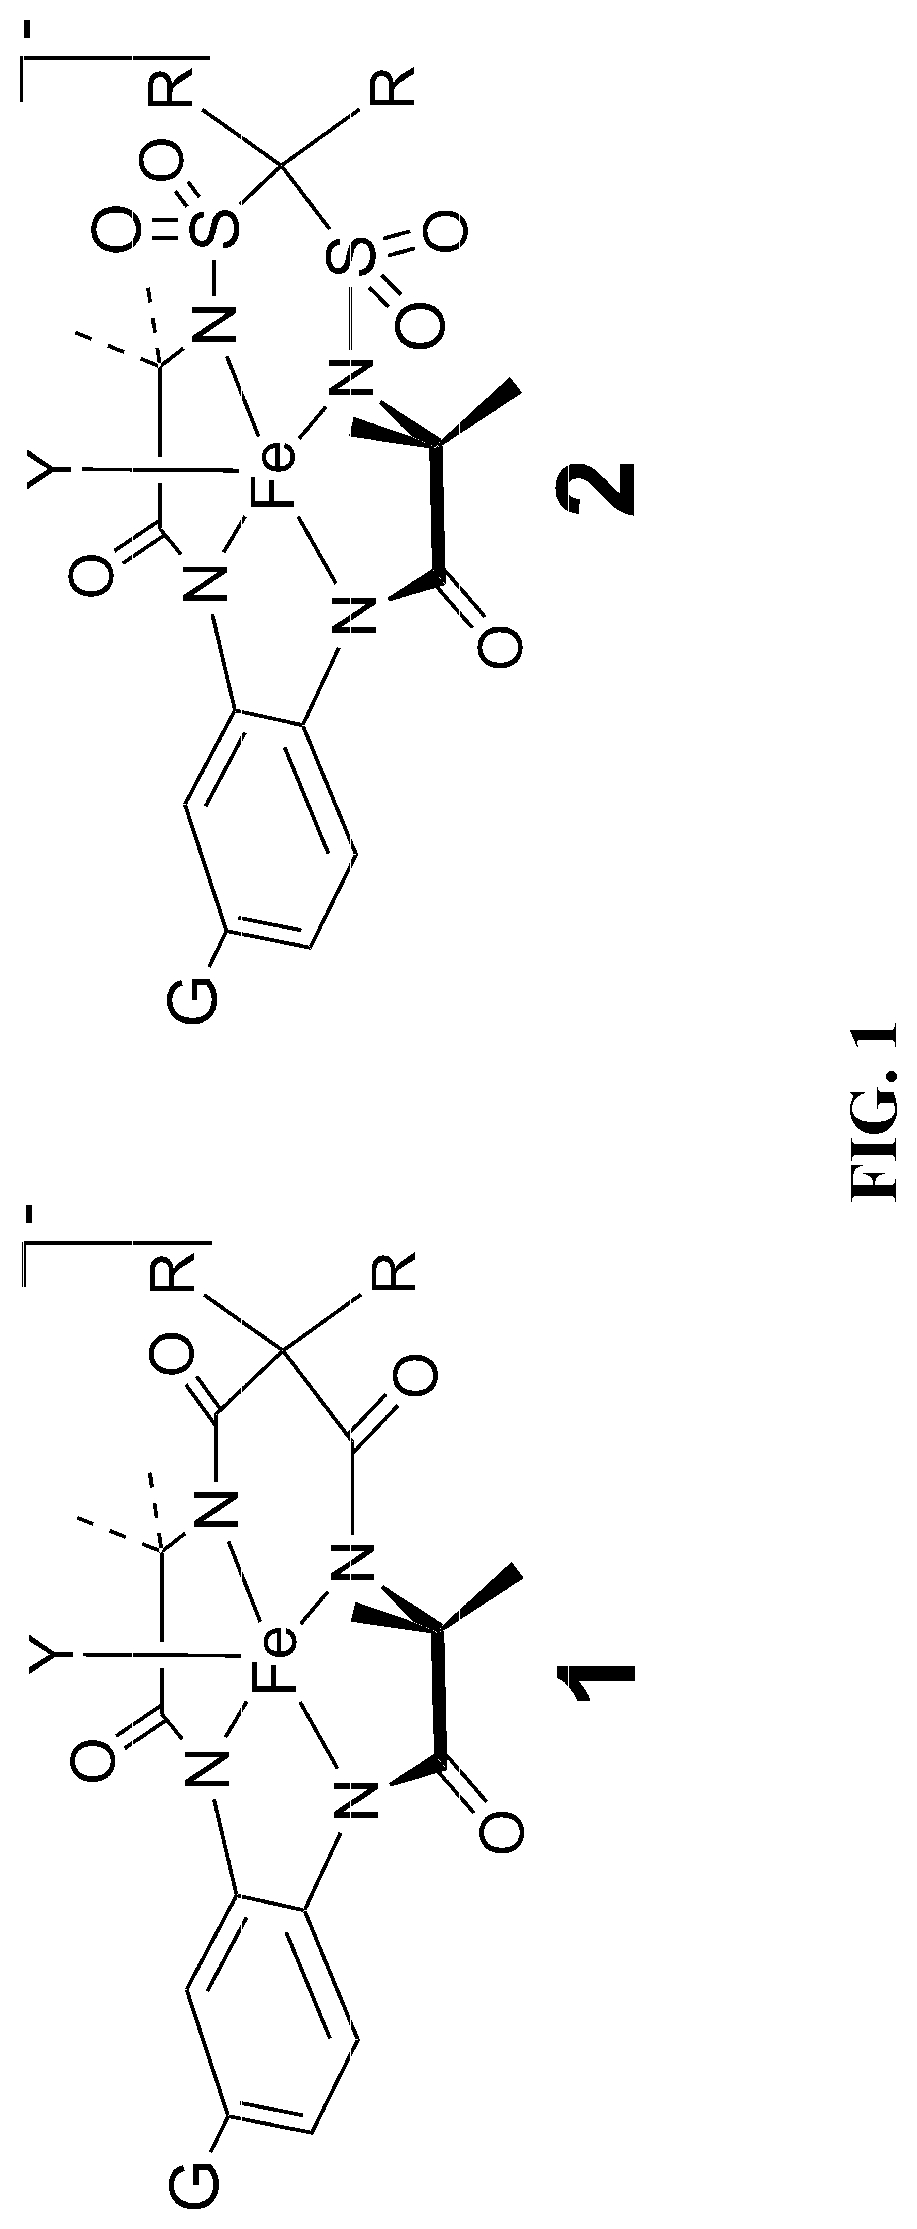 Far superior oxidation catalysts based on macrocyclic compounds